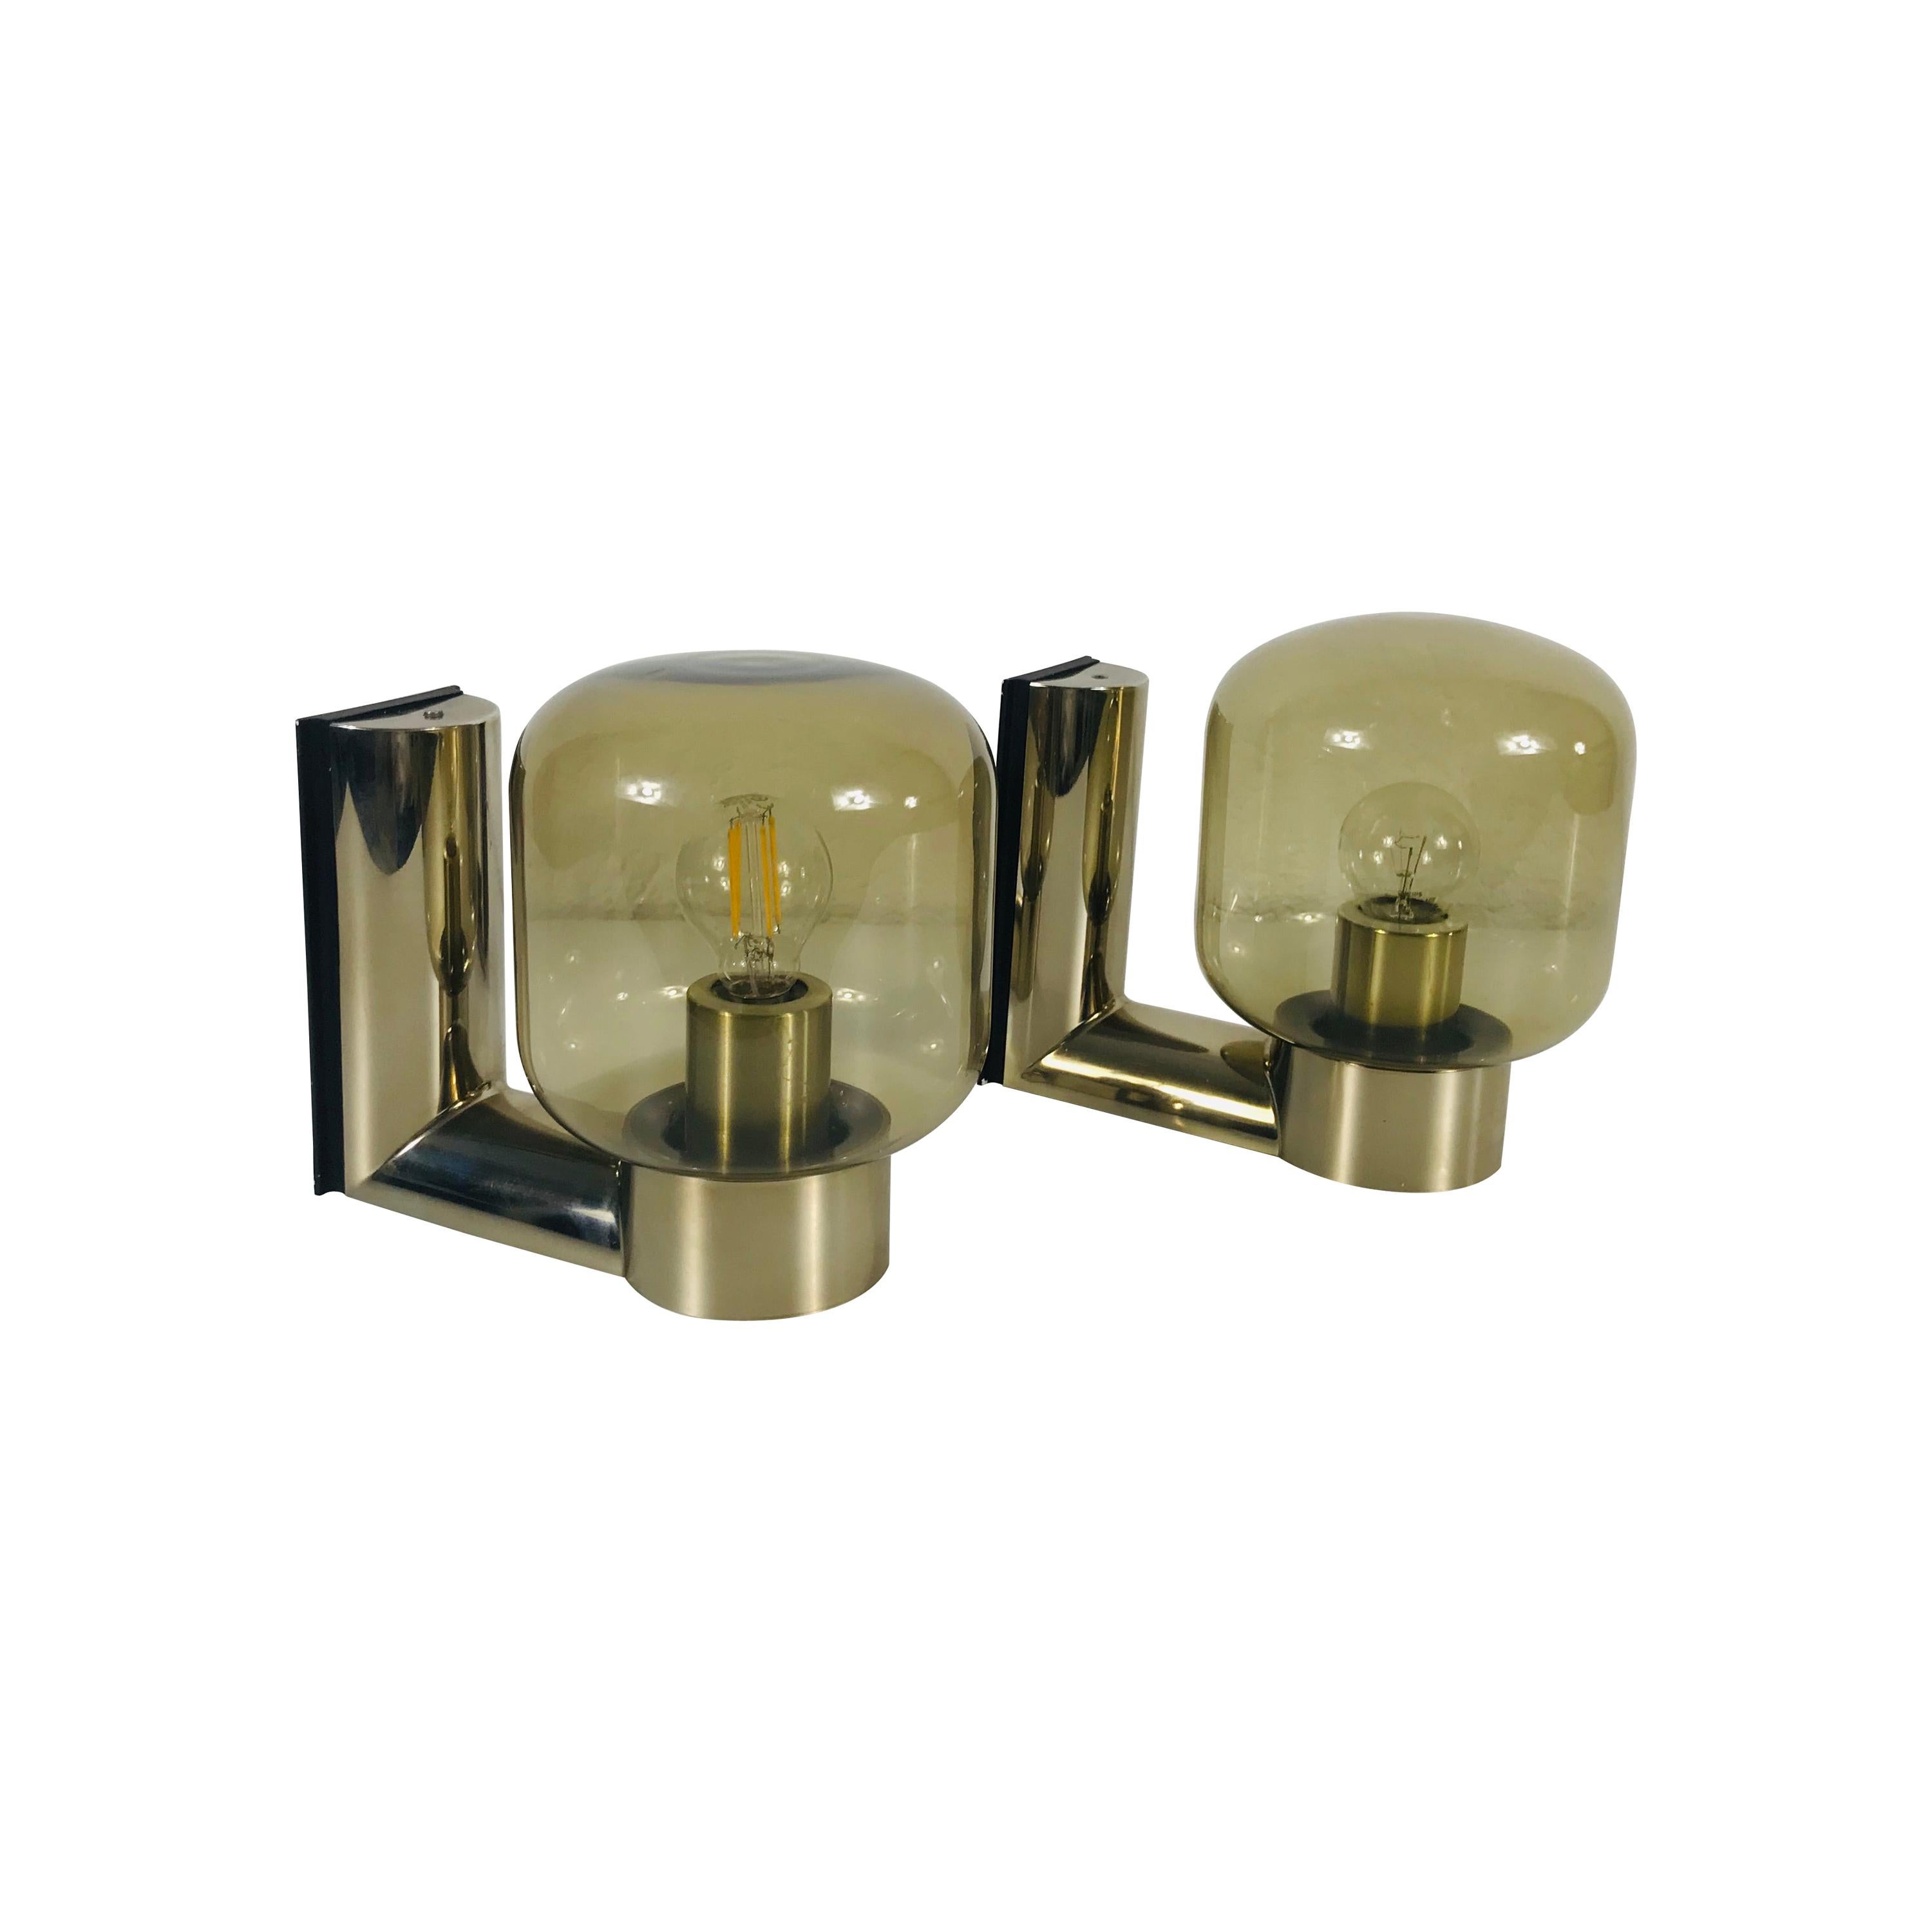 Pair of Rare Wall Lights by Motoko Ishii for Staff Leuchten, 1970 For Sale